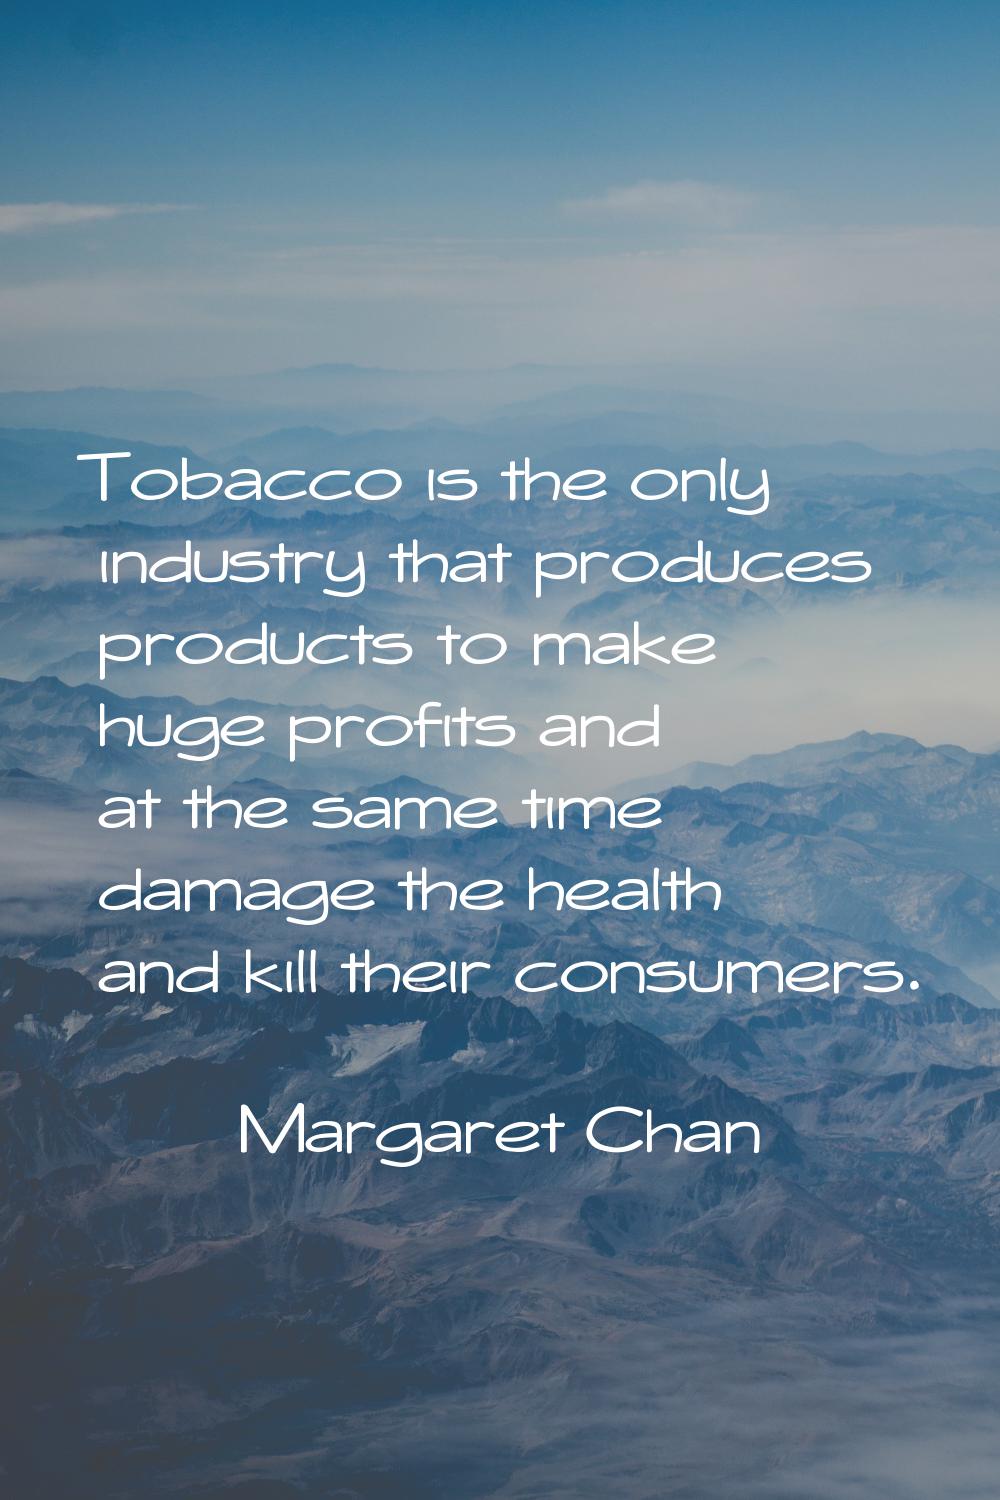 Tobacco is the only industry that produces products to make huge profits and at the same time damag